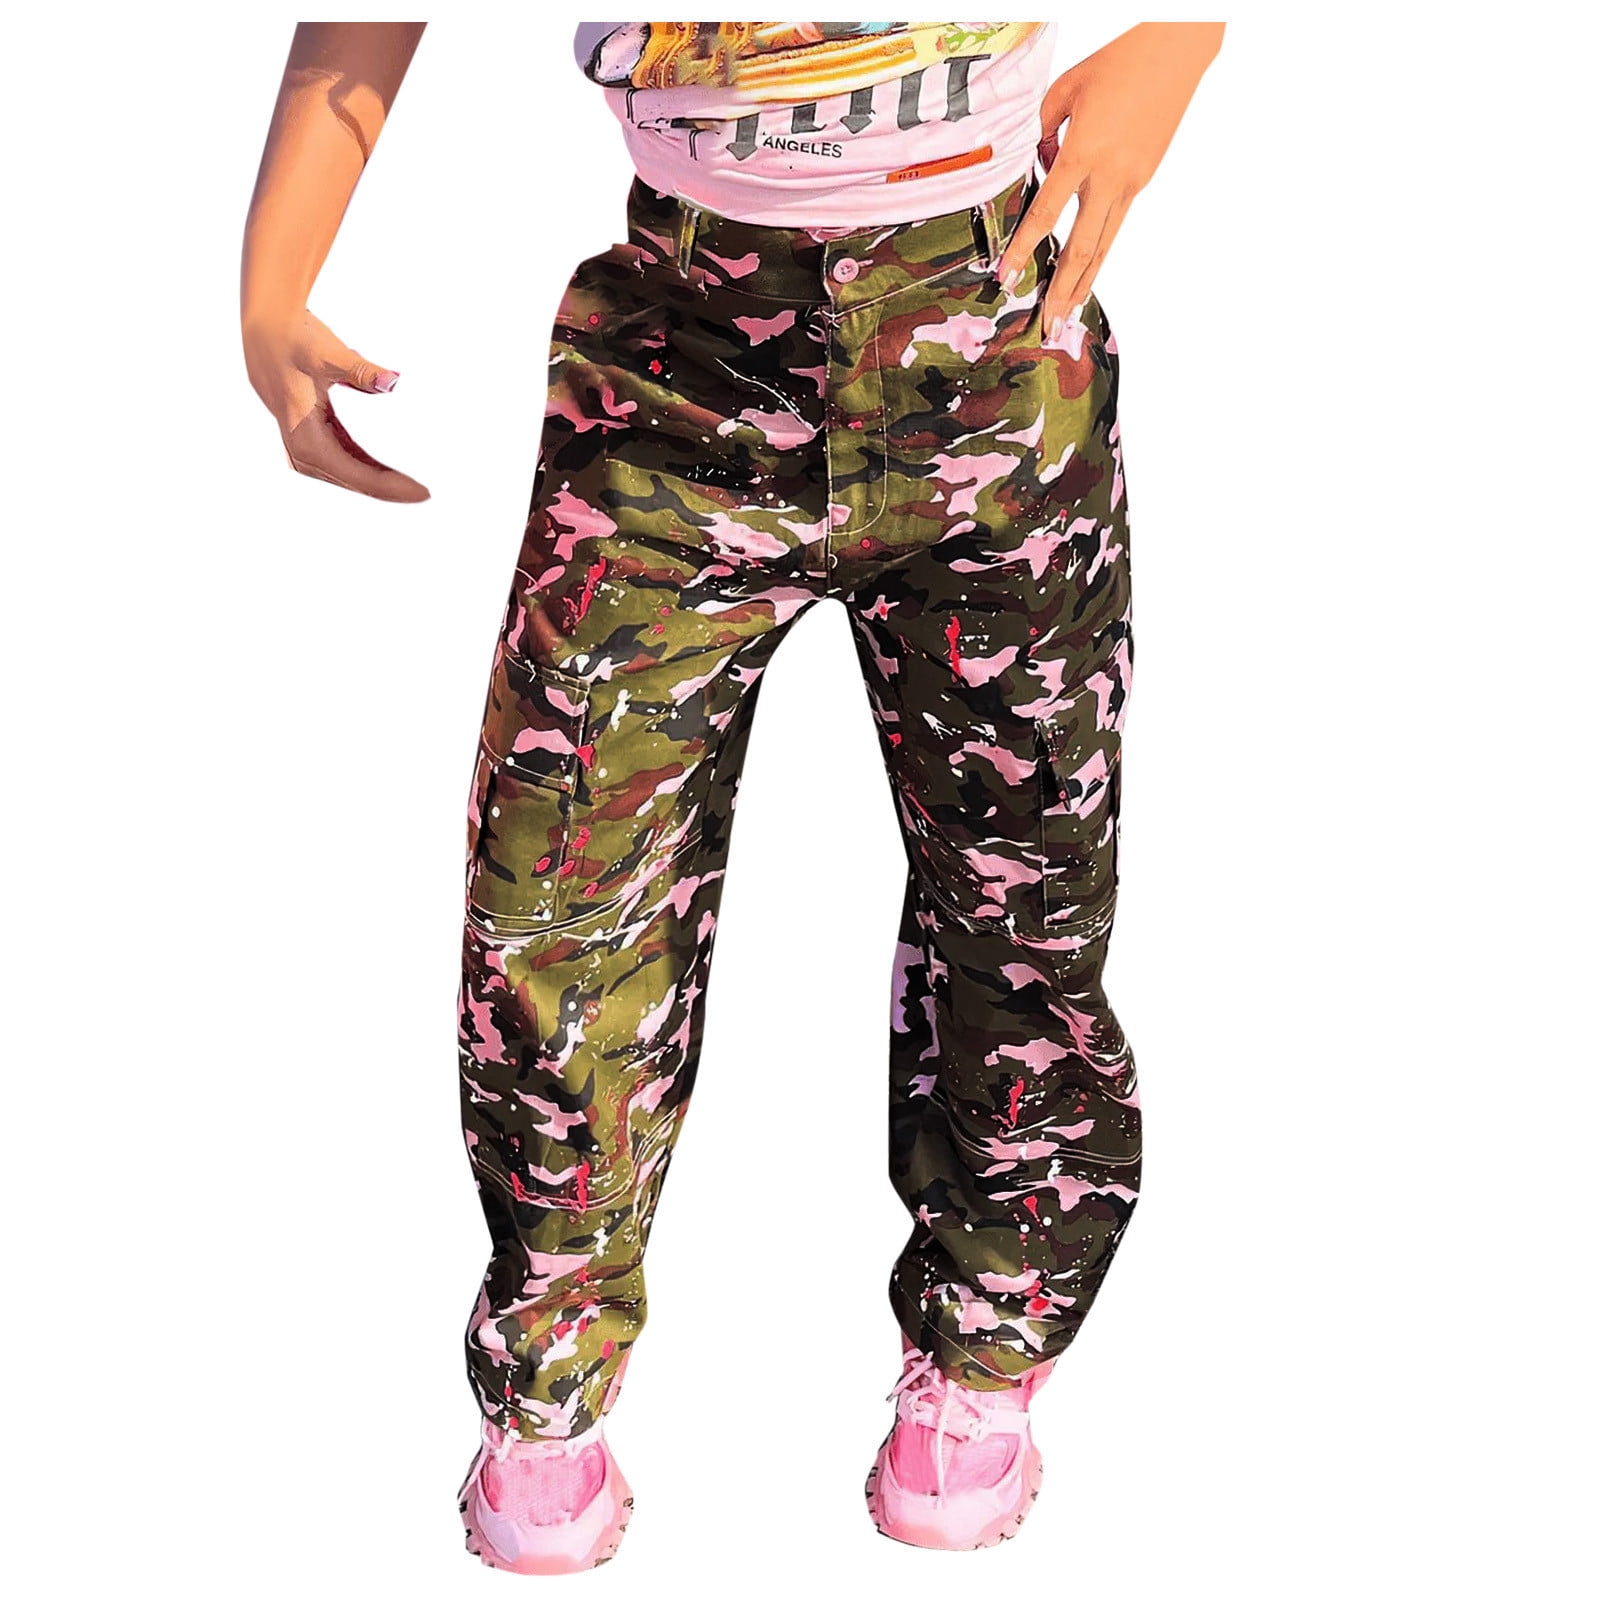 Black Off Shoulder T Shirt And Camouflage Pants Set For Baby Girls 1 6Y  Fashionable Kids Clothing Stores For Girls From Feida98, $11.93 | DHgate.Com